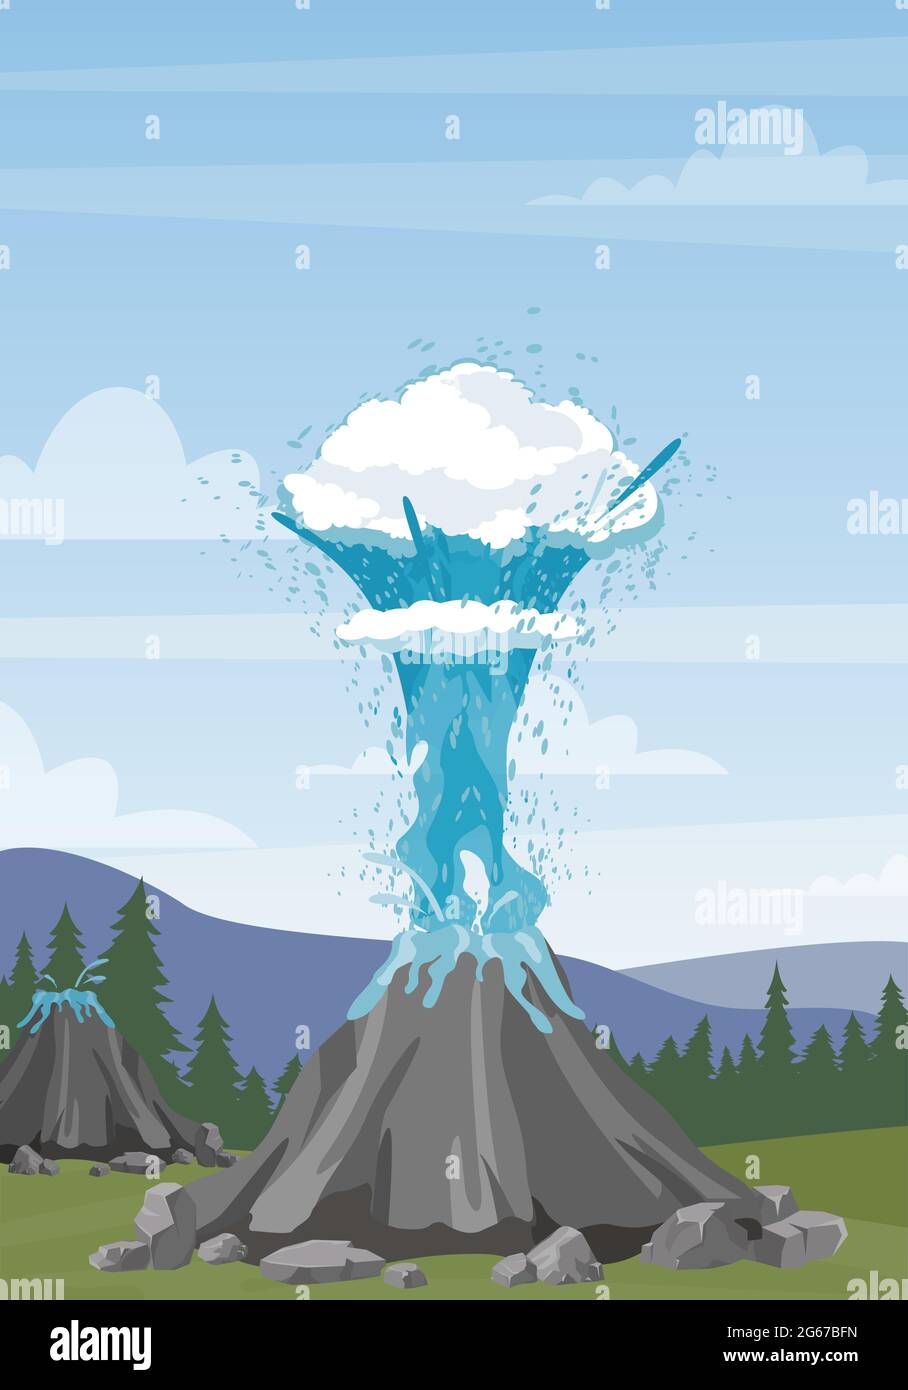 Vector illustration of water geyser and steam erupting from geyser on mountains background. Iceland landscape with geyser in flat cartoon style. Stock Vector